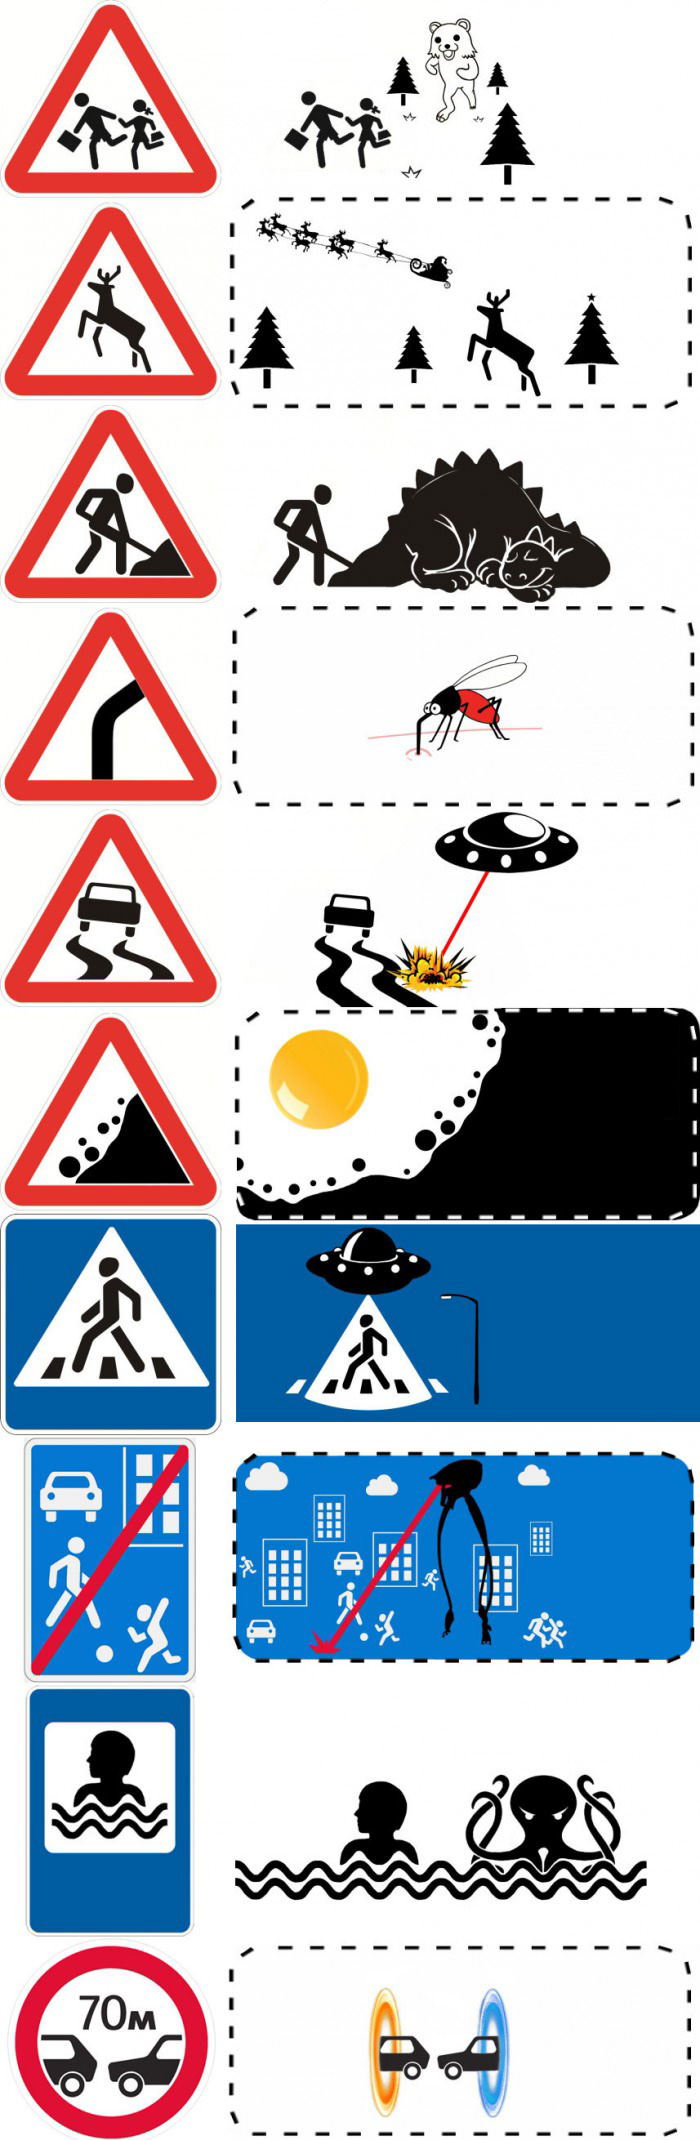 what those road signs really mean, the bigger picture